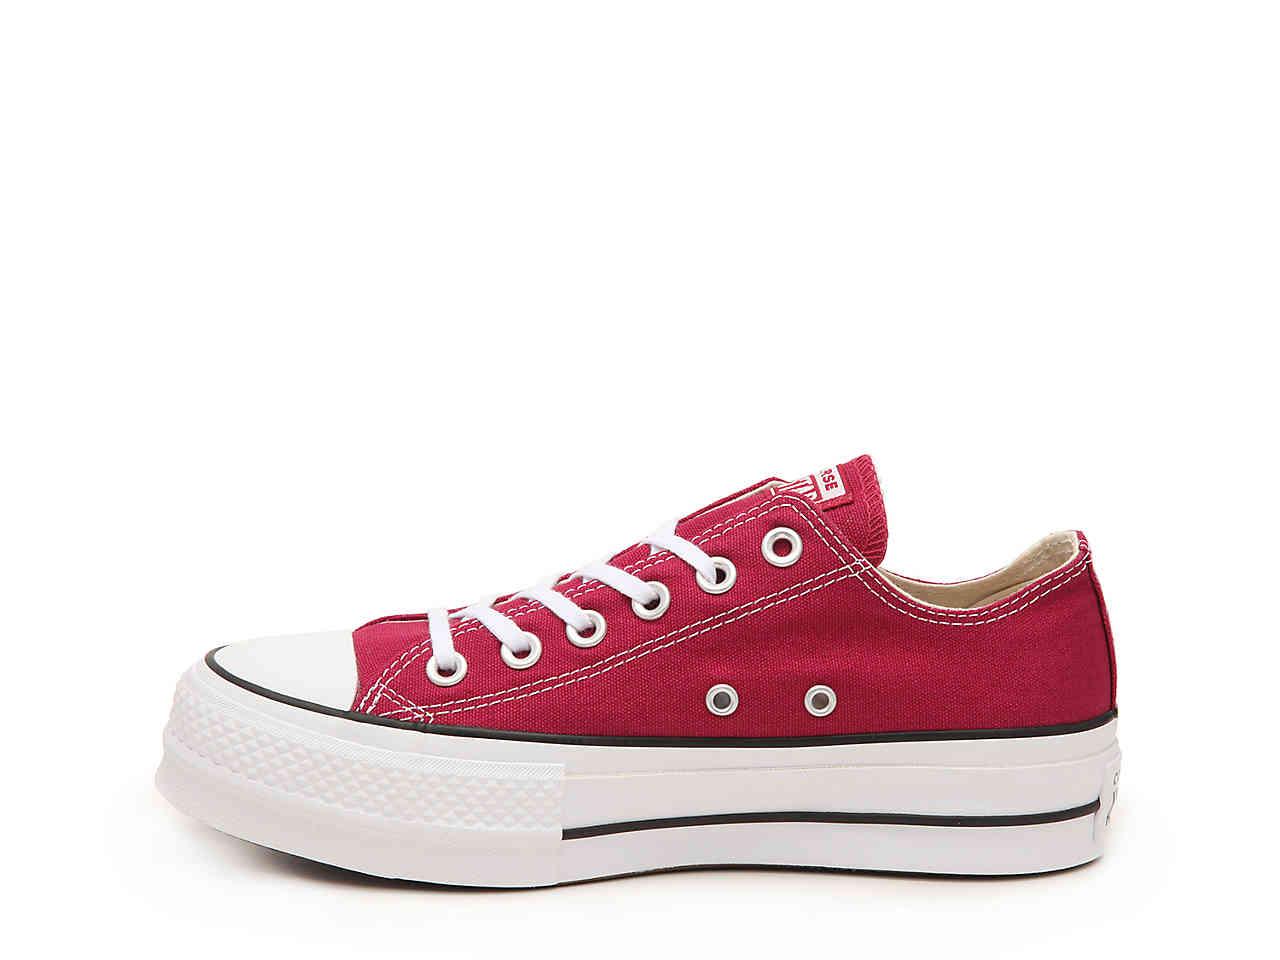 Converse Chuck Taylor All Star Lift Platform Sneaker in Red | Lyst